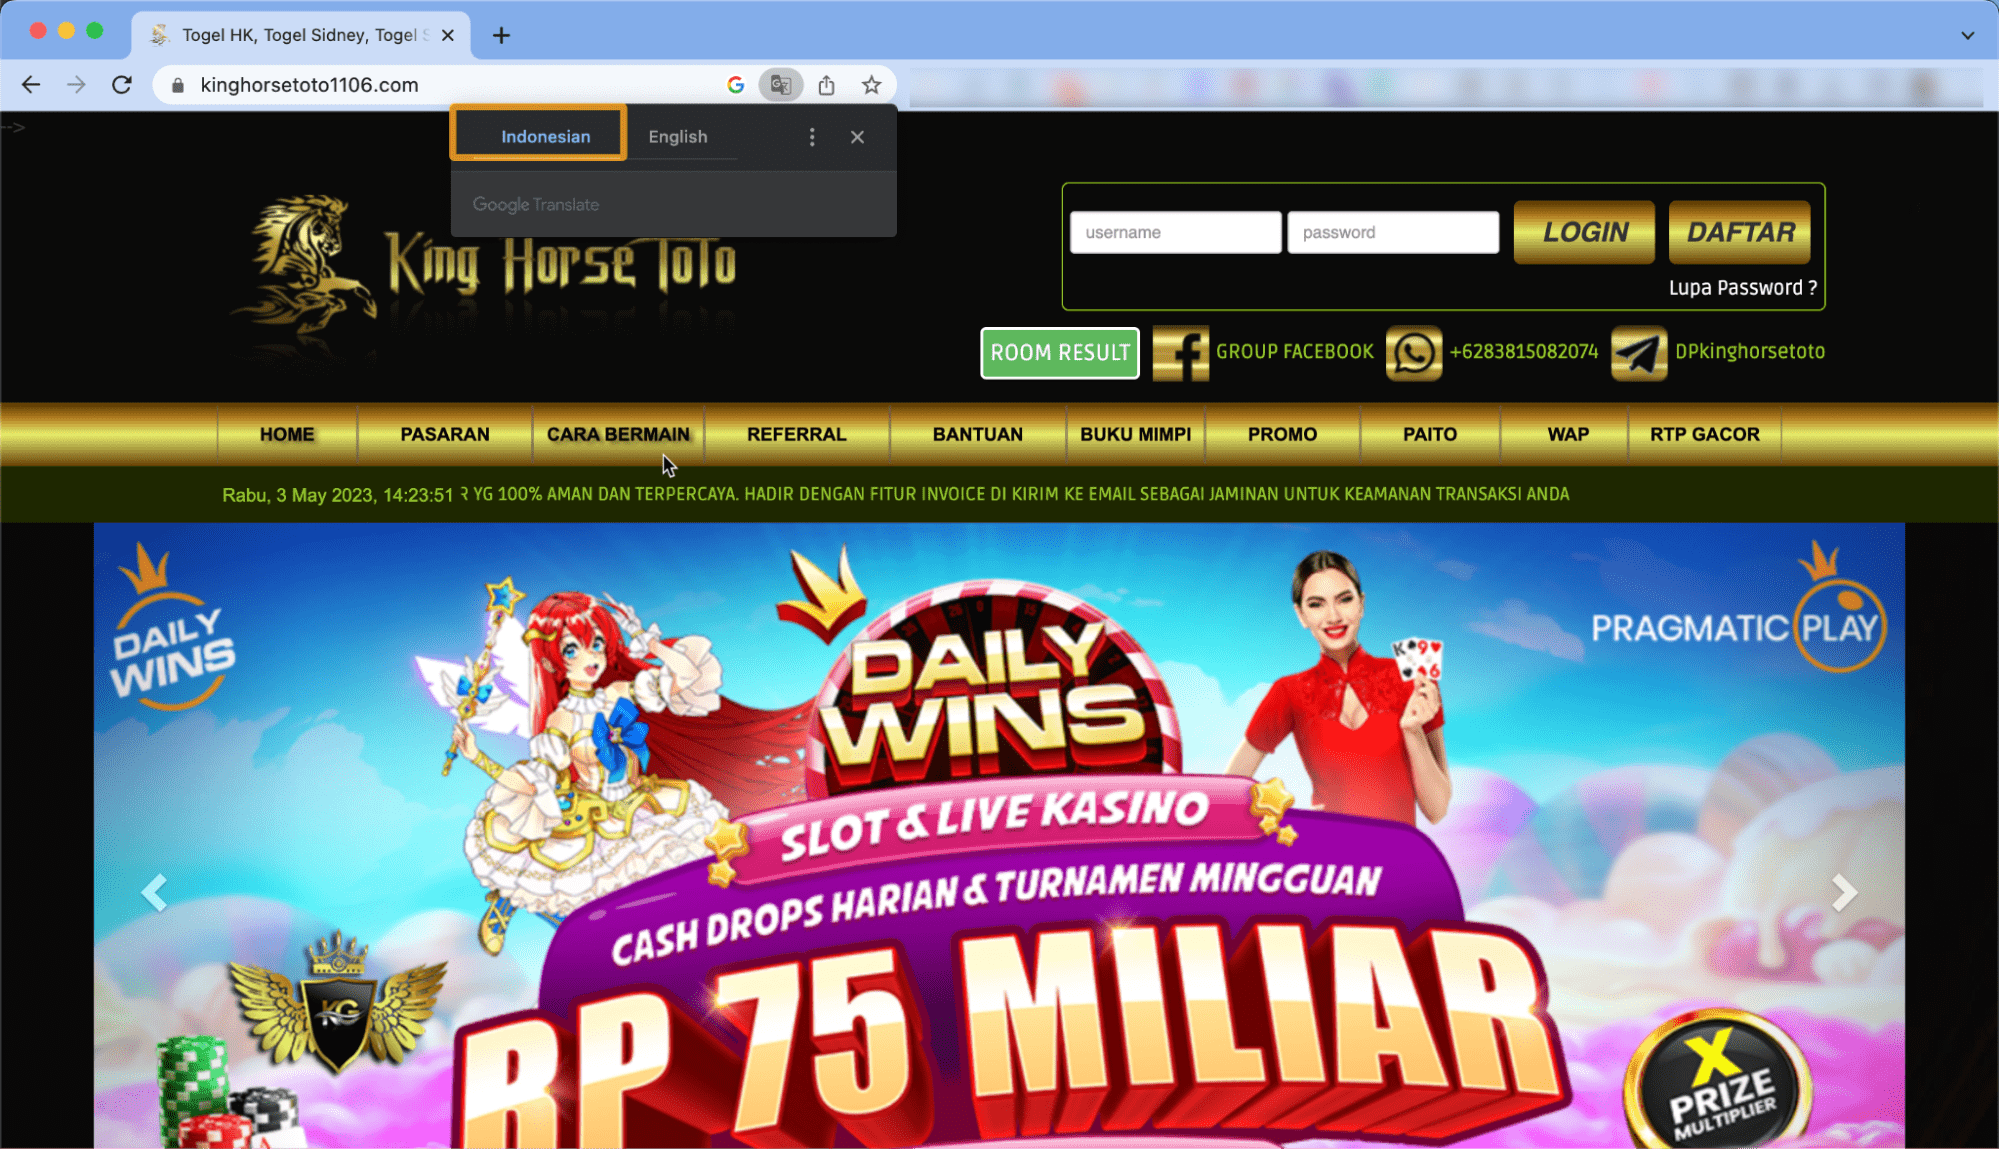 Indonesian casino site that was in the top traffic drivers list for Linktree
